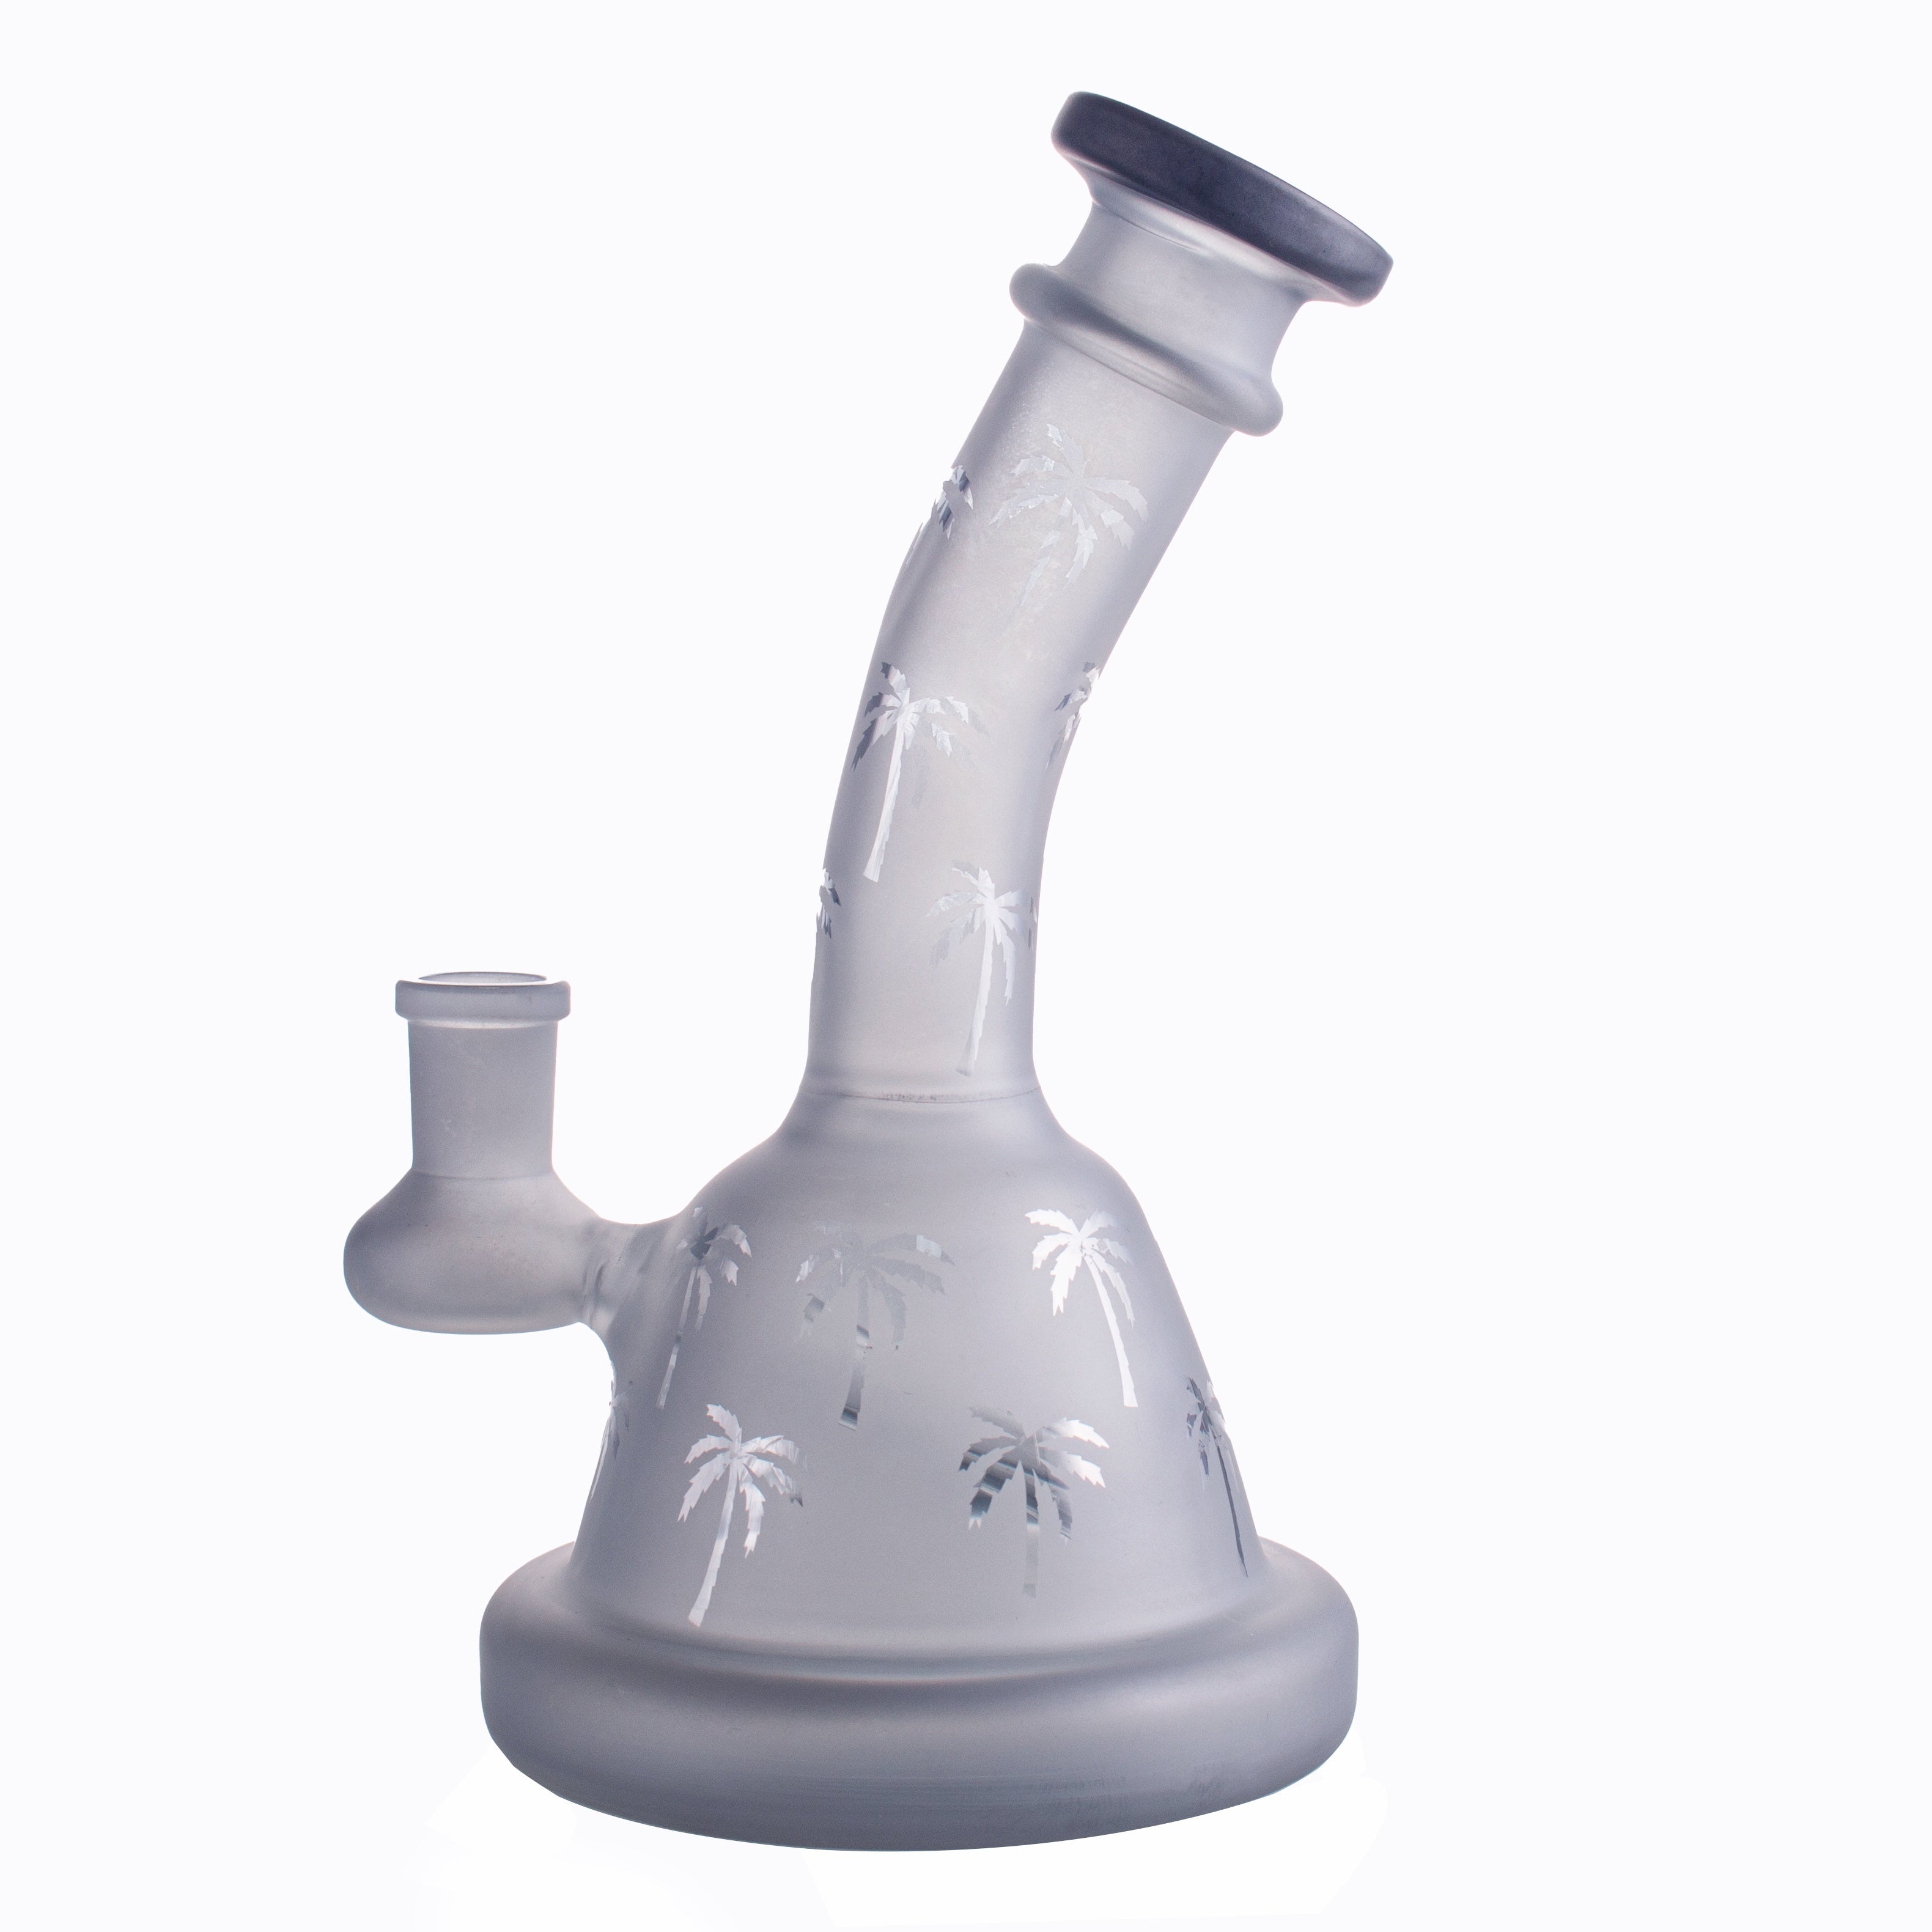 Flat 14mm Dab Nail w/ Replaceable Bowl | Smoking Outlet